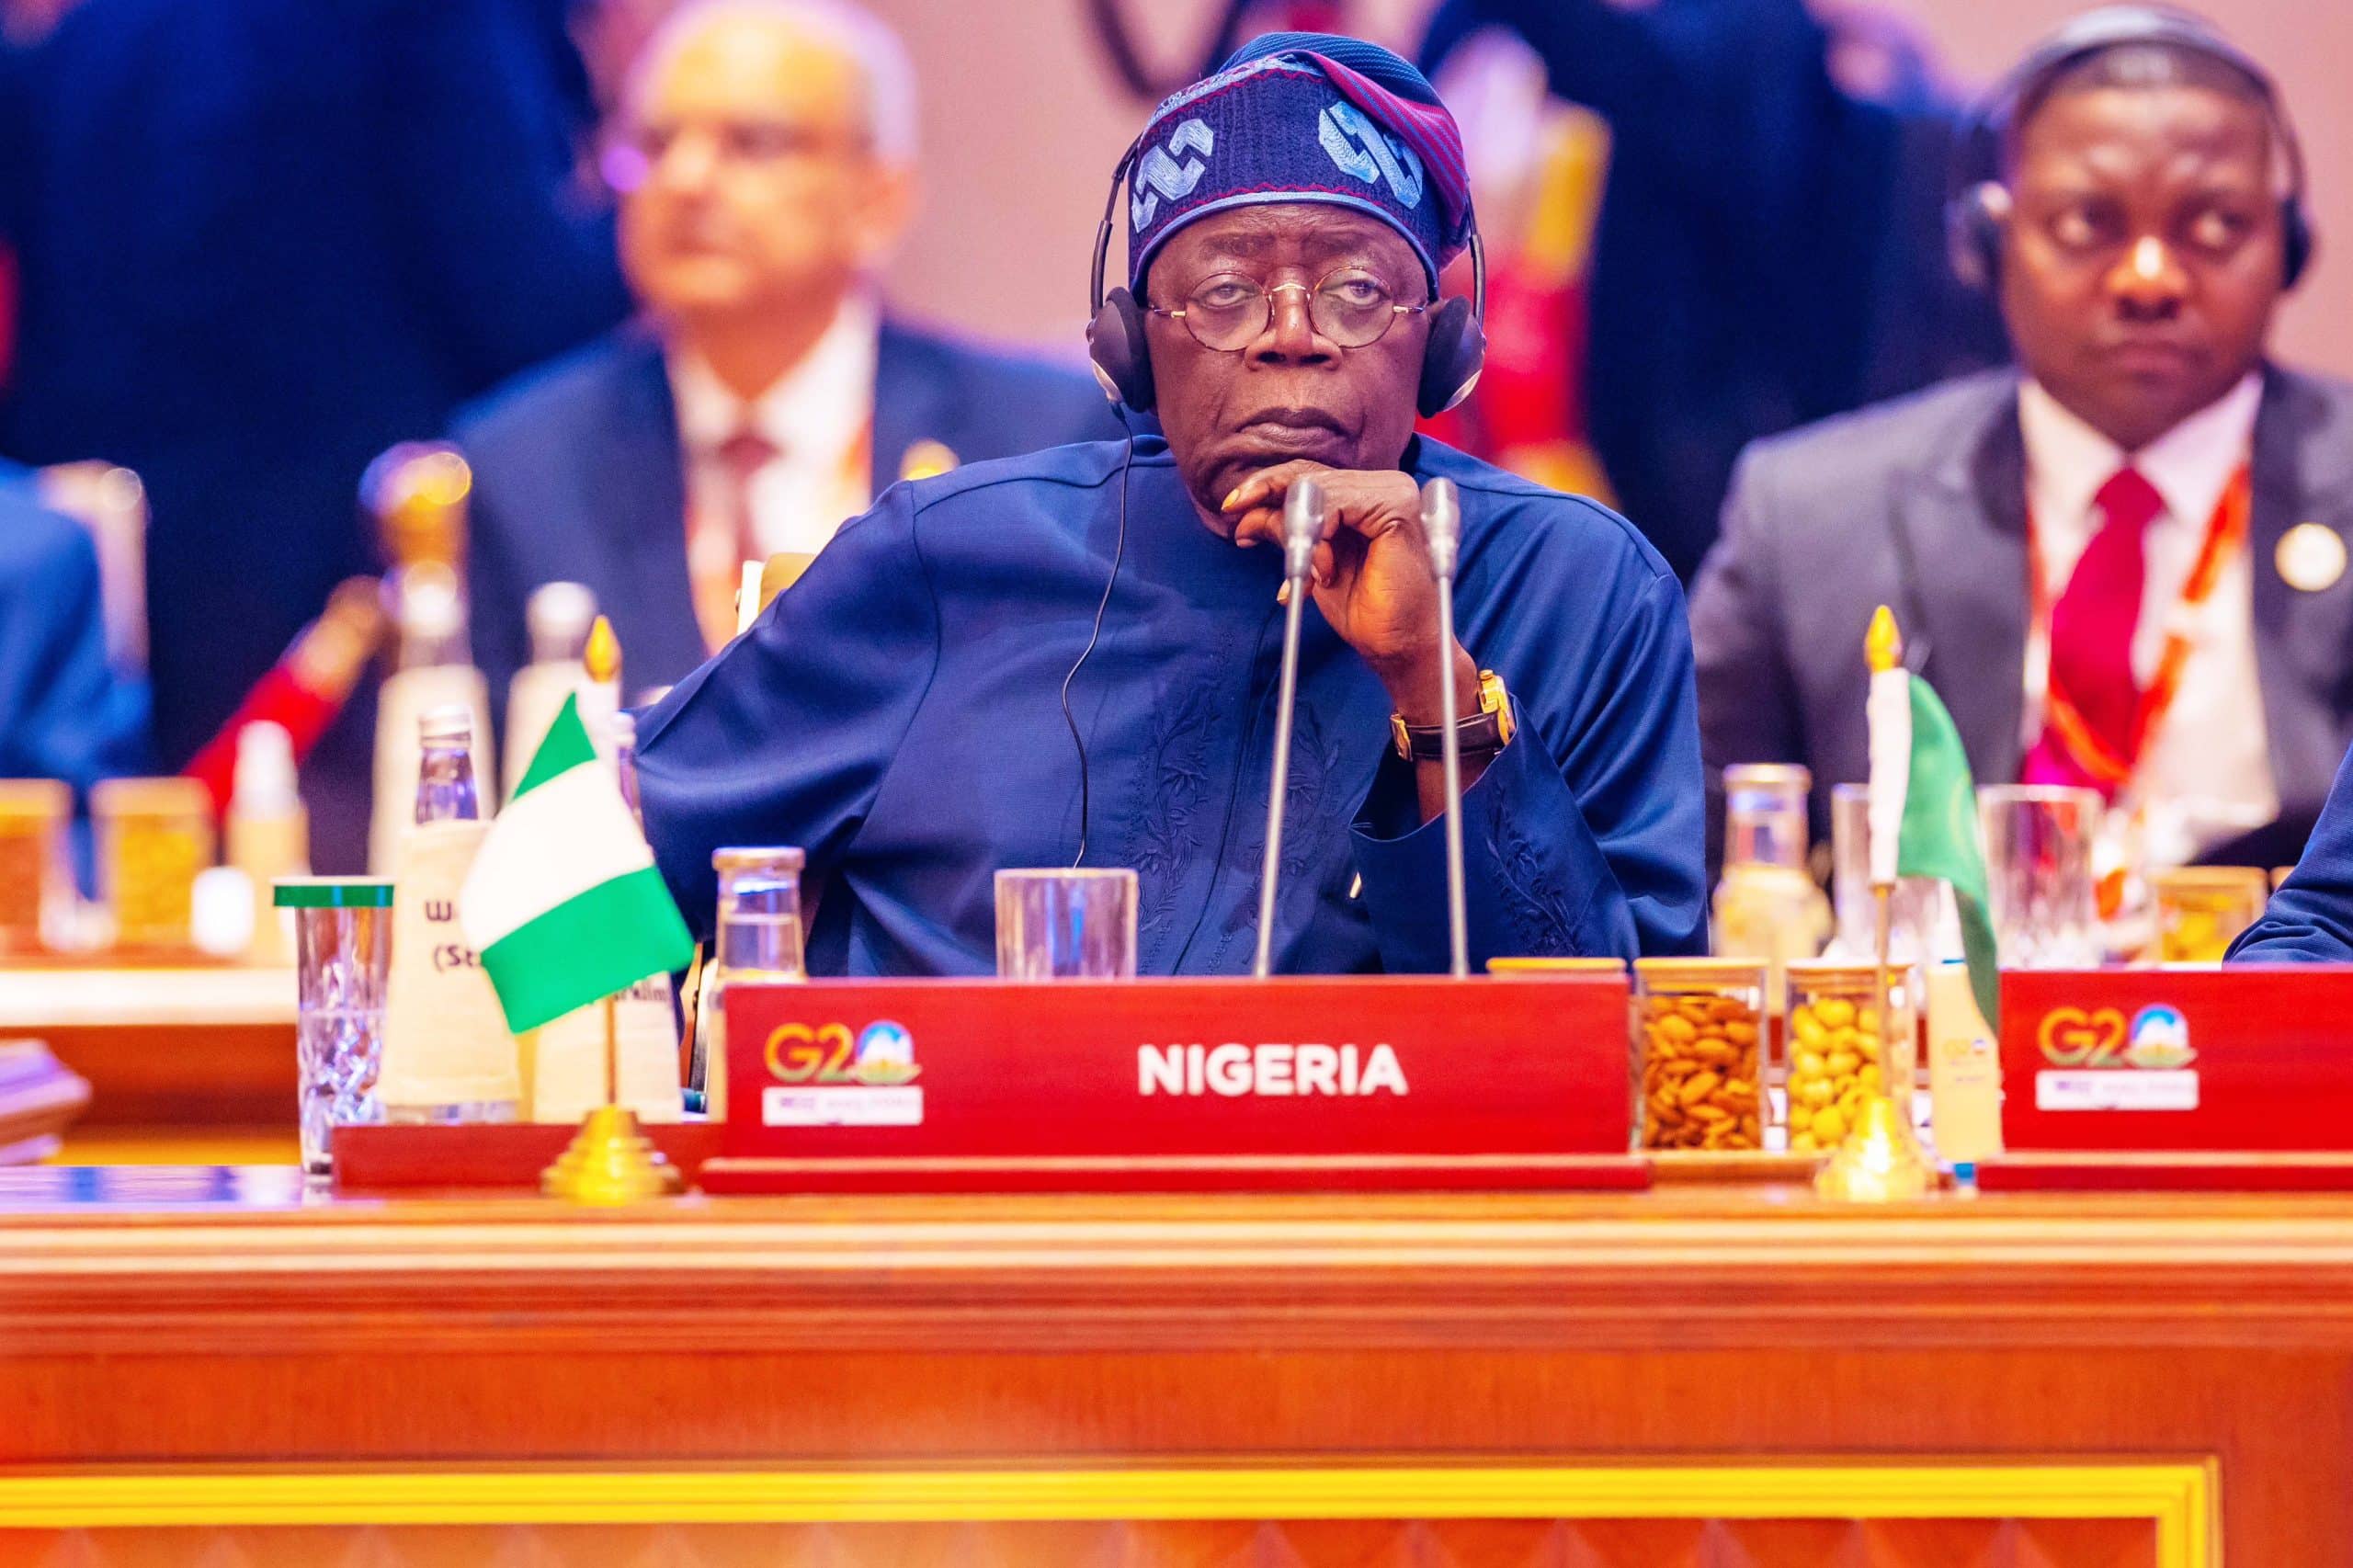 Five Expected Highlights Of Tinubu’s Speech At UN General Assembly